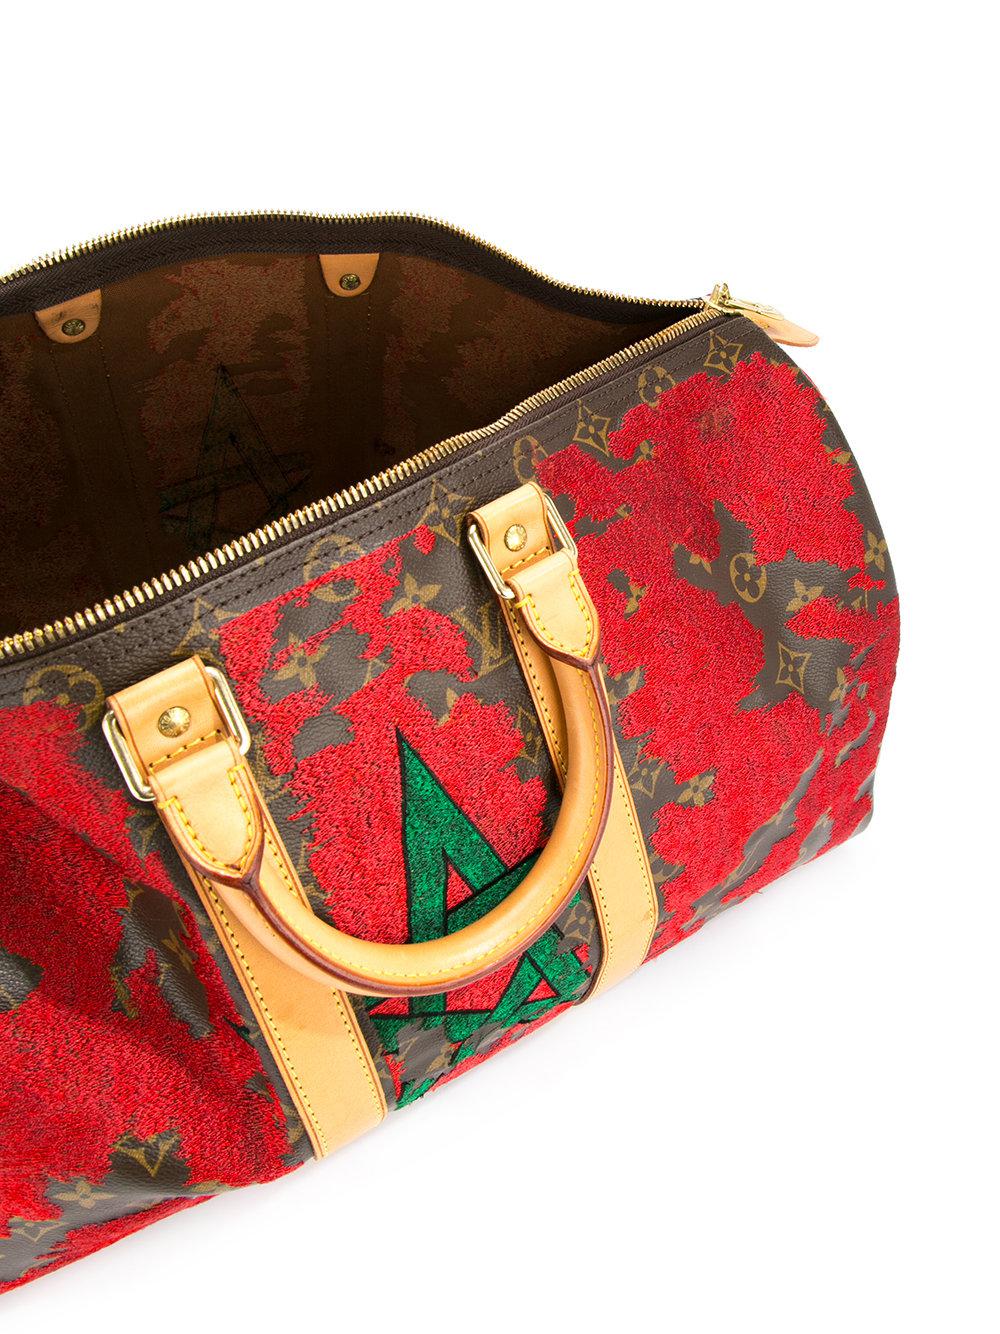 Jay Canvas Morocco Flag Vintage Vuitton Keepall in Red Lyst